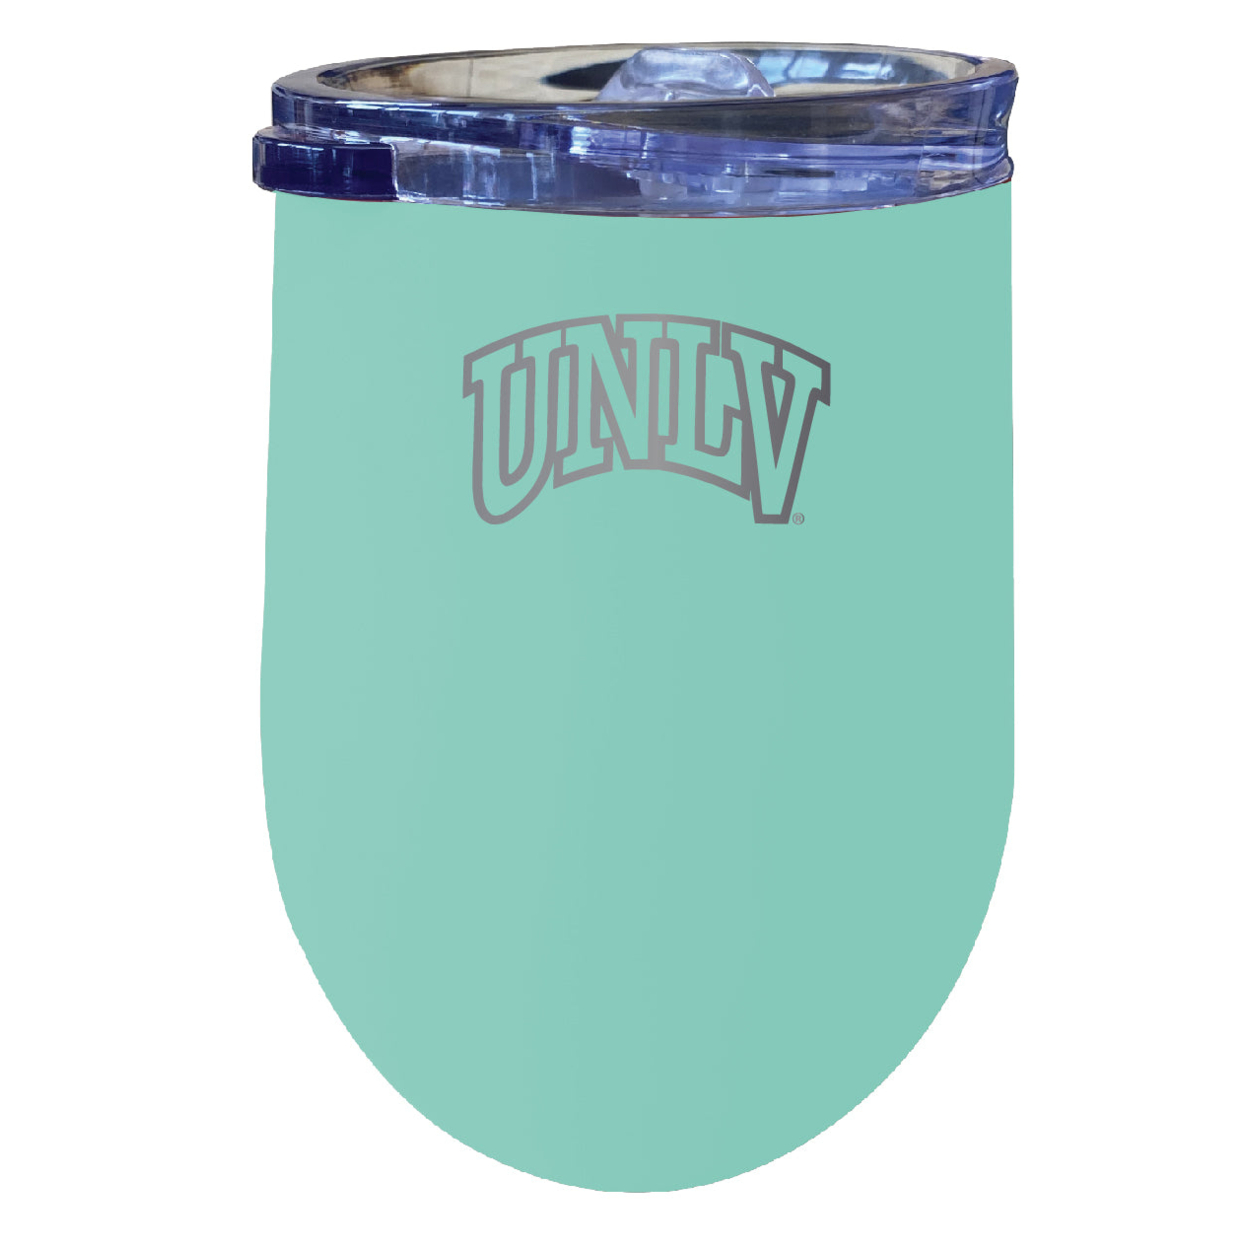 UNLV Rebels 12 Oz Etched Insulated Wine Stainless Steel Tumbler - Choose Your Color - Seafoam